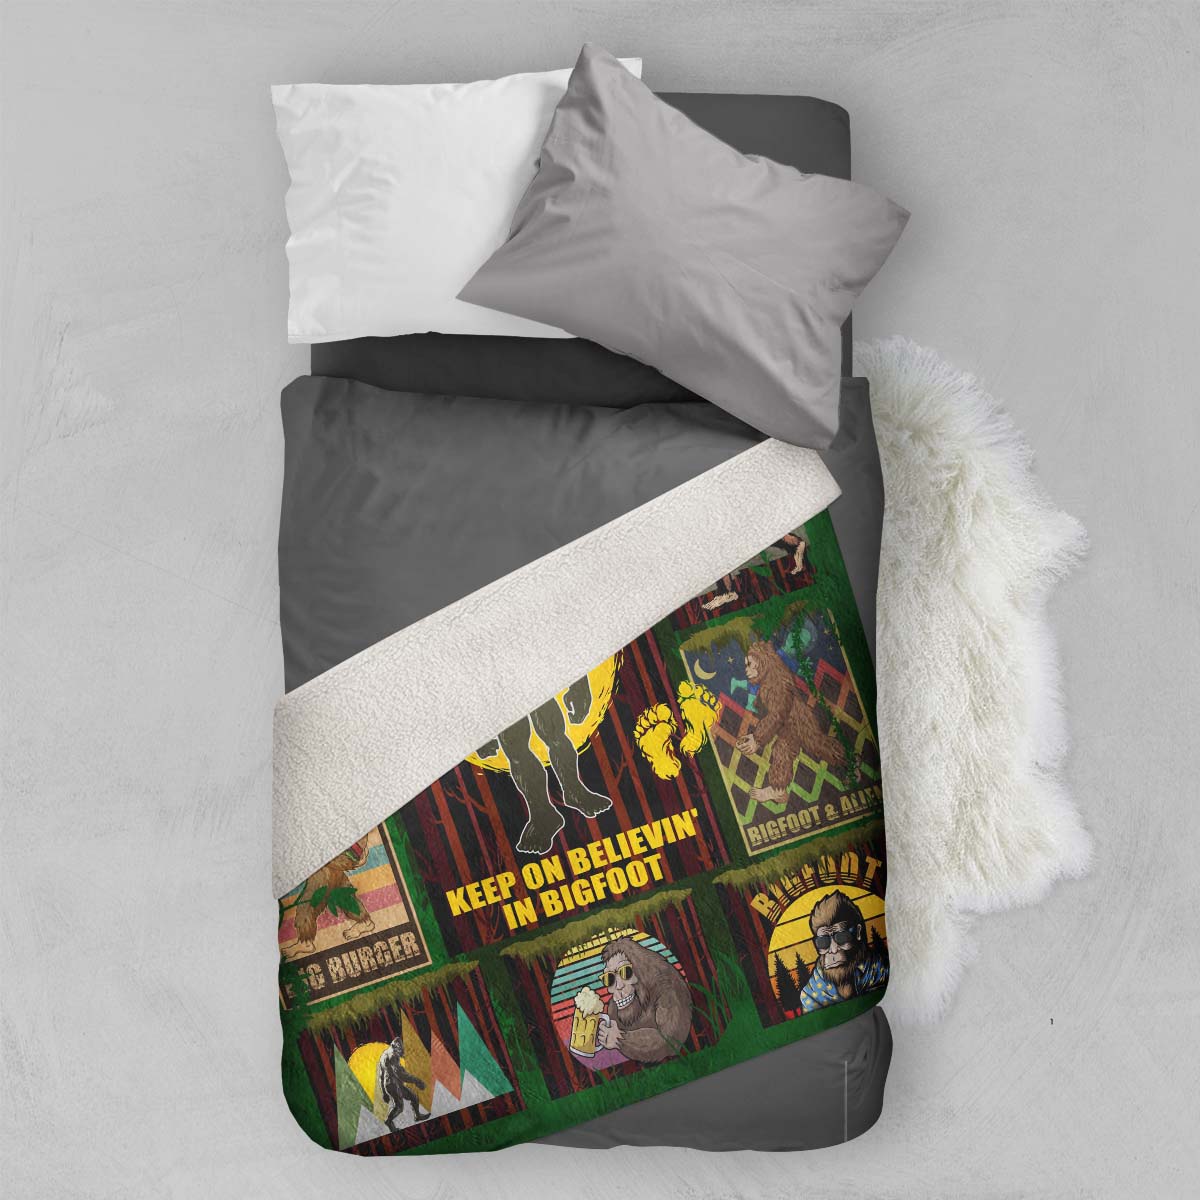 Personalized Custom Name Bigfoot Sasquatch Believe Hide and Seek World Champion Sherpa Fleece Throw Blanket Birthday Big Foot Camping Presents for Mom Dad Wife Husband Kids Son Daughter Campers